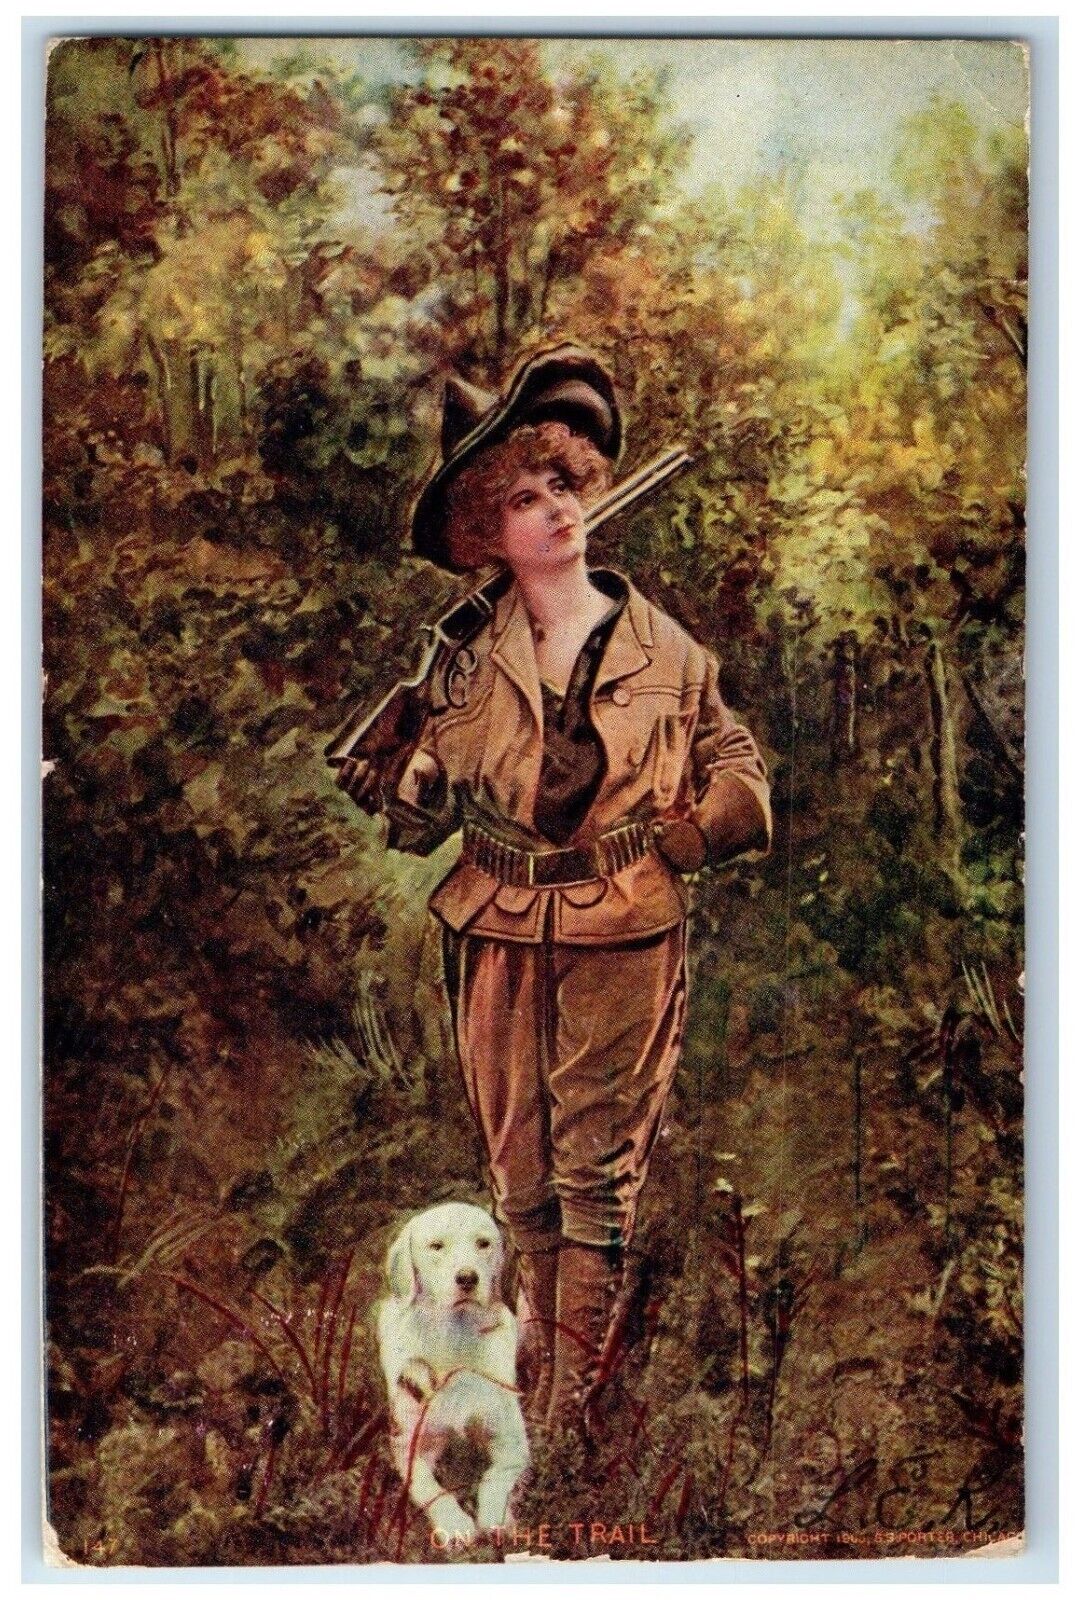 1906 Woman Hunting On The Trail With Dog Oak Park Illinois IL Antique Postcard